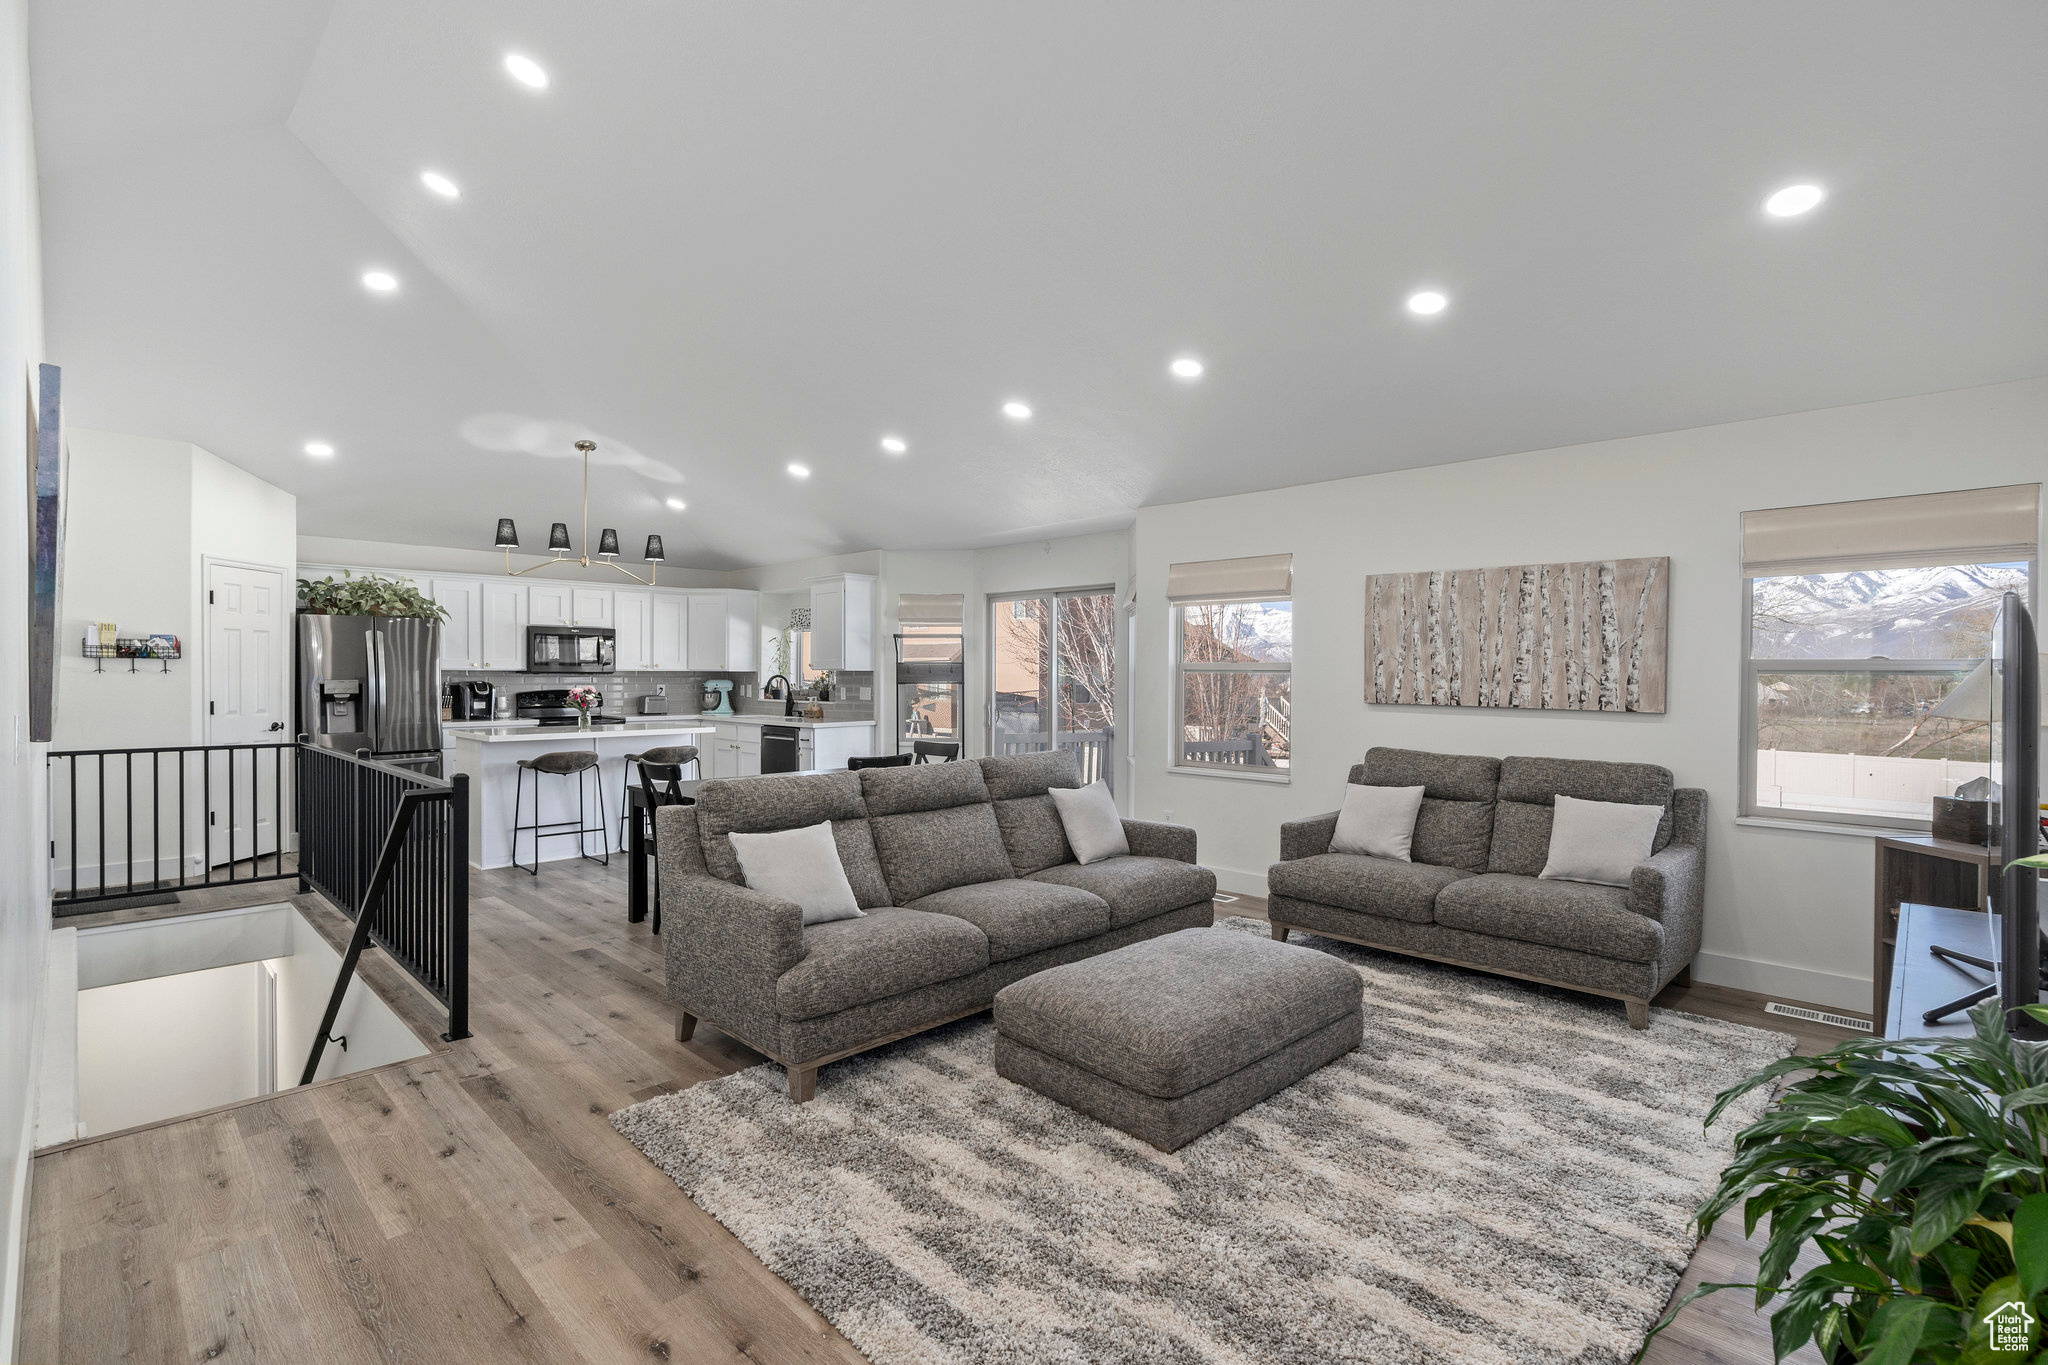 Family room featuring high vaulted ceiling and light flooring